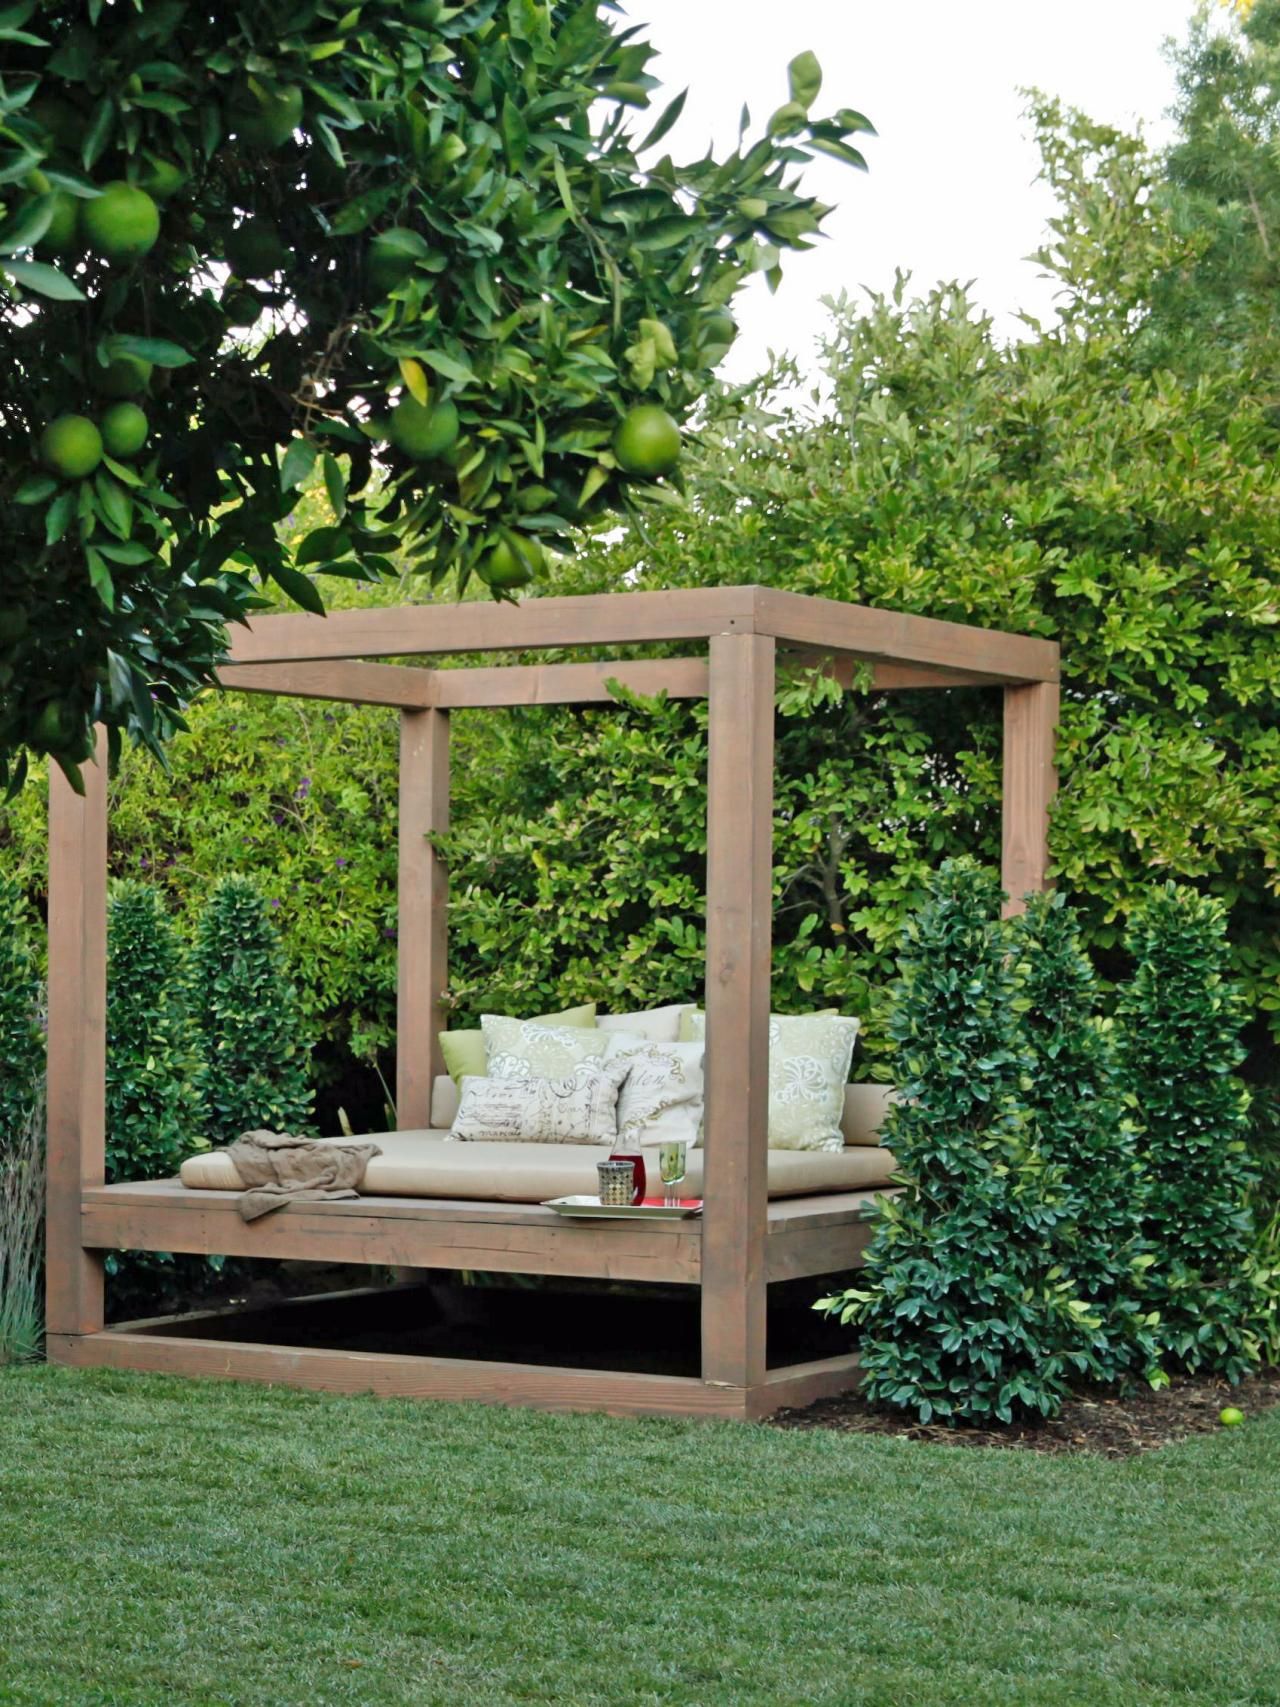 The Comfort and Relaxation of Outdoor Daybeds